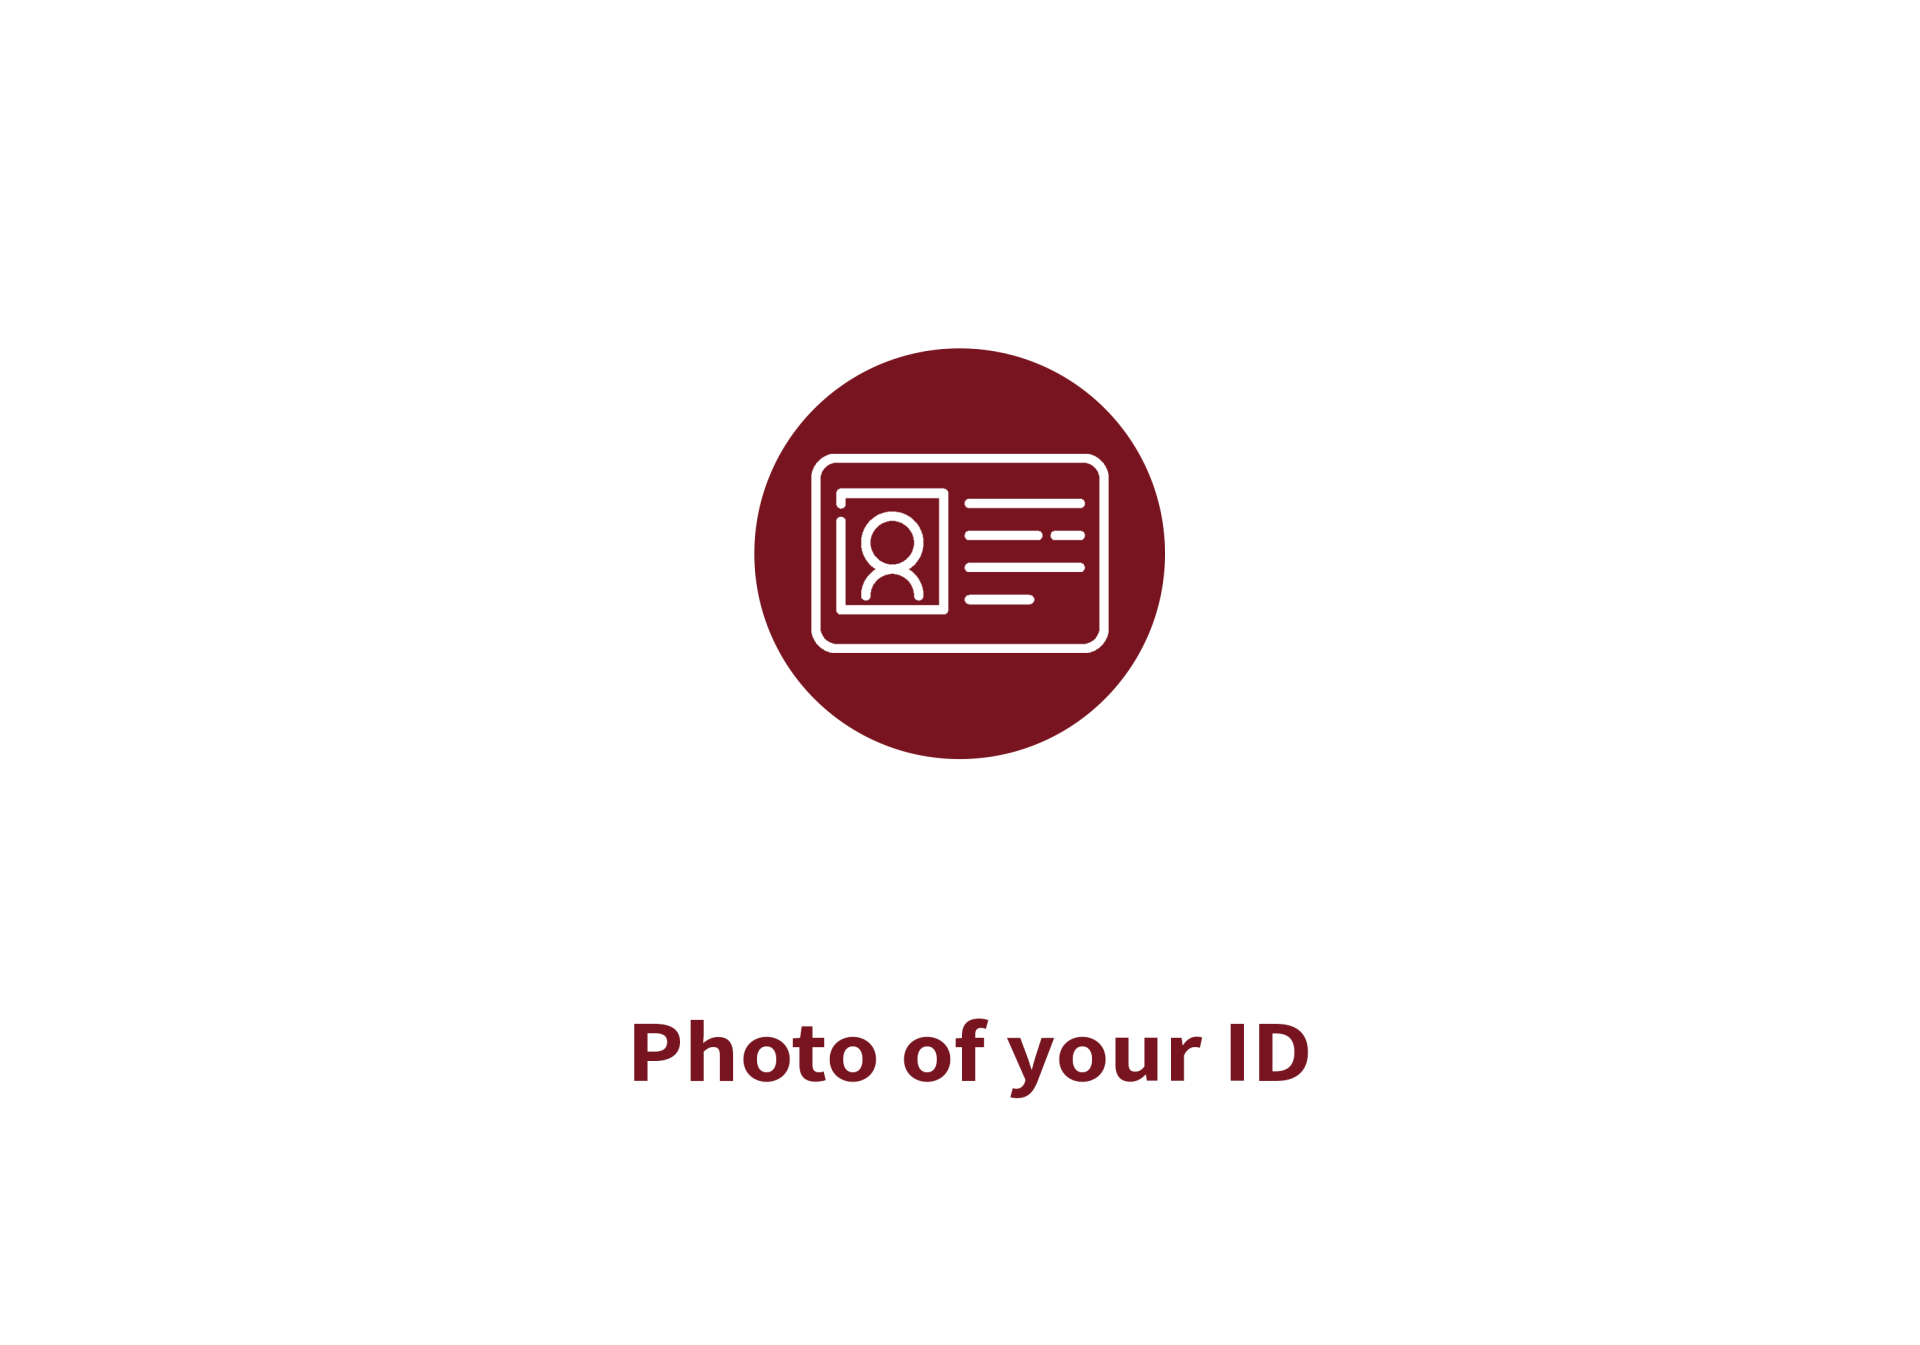 A picture of a id card in a circle with the words `` photo of your id ''.